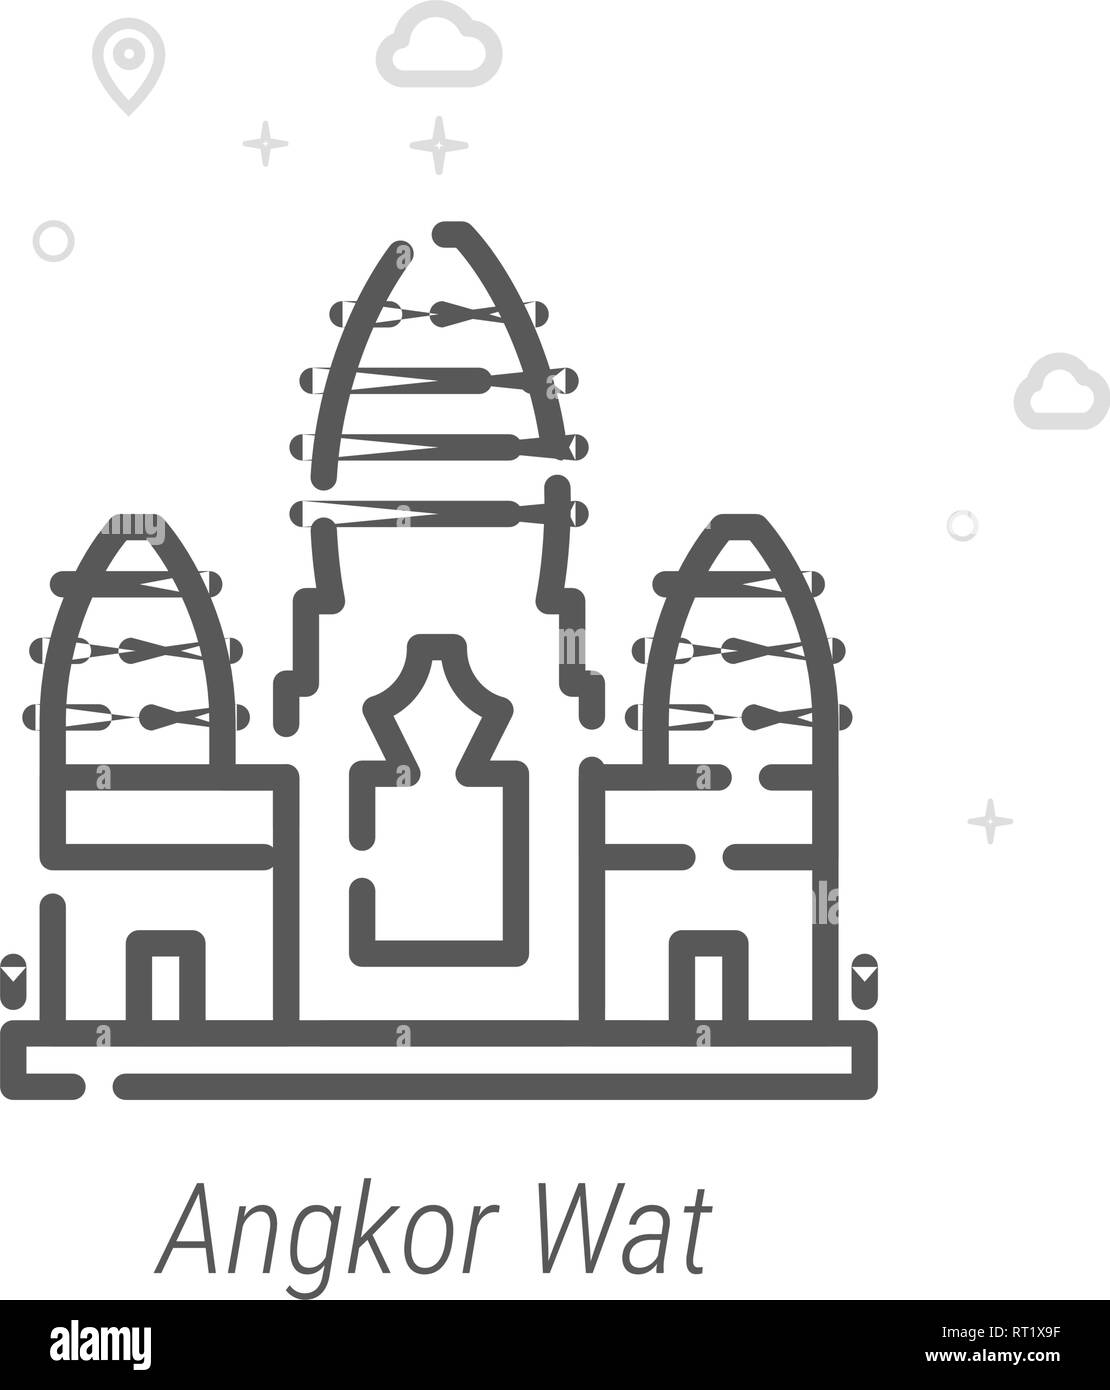 Angkor Wat, Cambodia Vector Line Icon, Symbol, Pictogram, Sign. Light Abstract Geometric Background. Editable Stroke Stock Vector